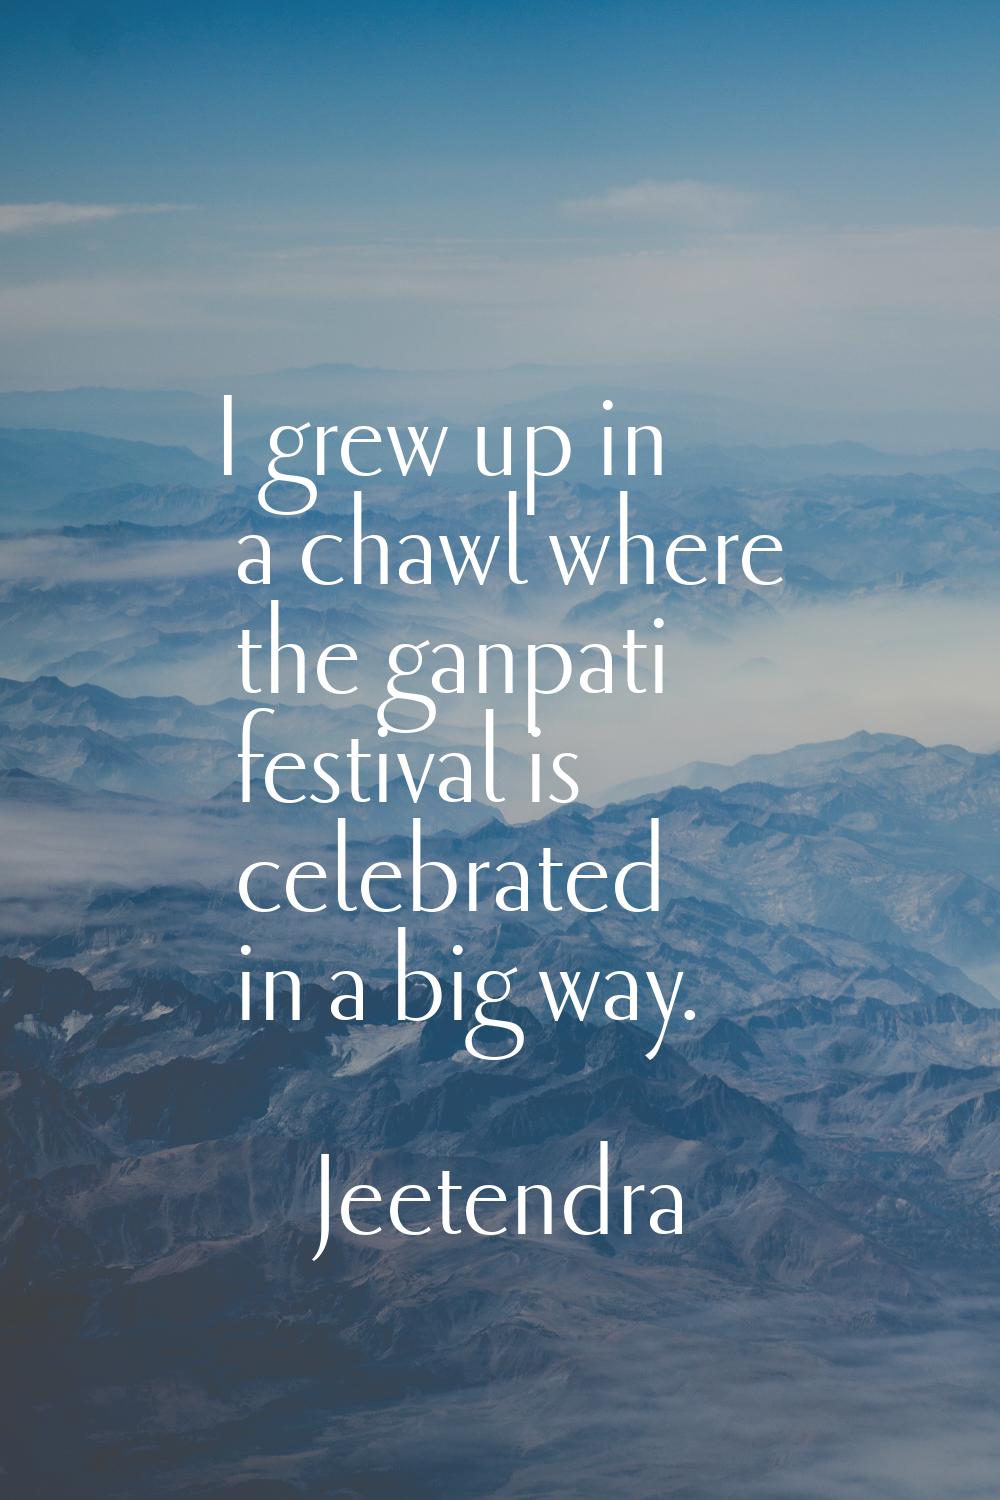 I grew up in a chawl where the ganpati festival is celebrated in a big way.